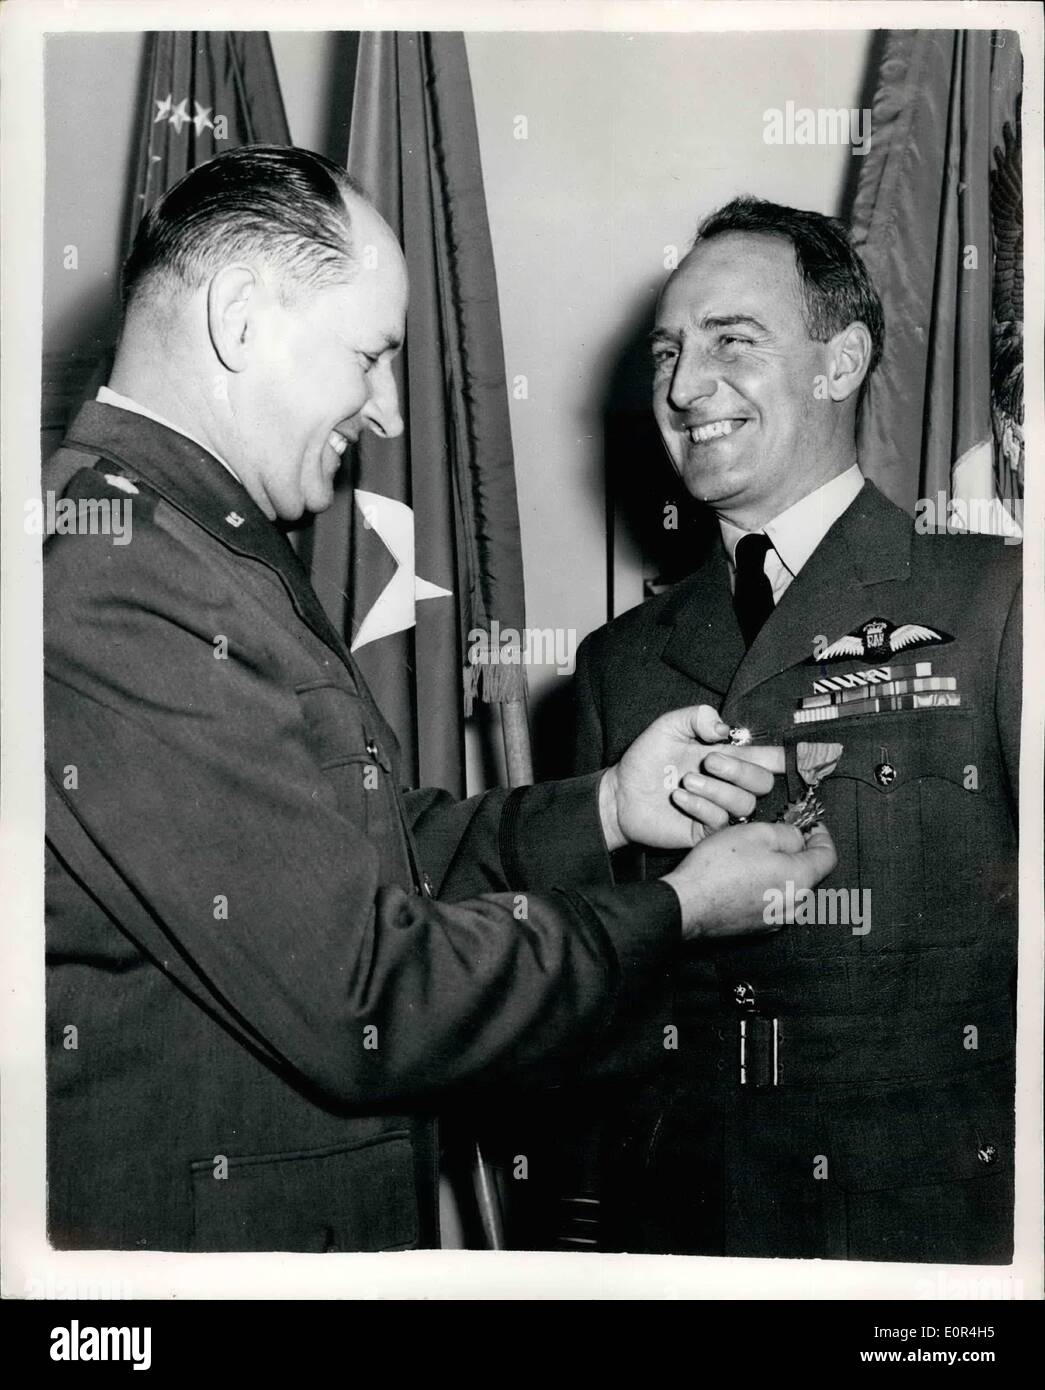 Mar. 03, 1958 - R.A.F. Officer recieves United States air medal award.: Squadron Leader Colin L. Blythe D.F.C., A.F.C., R.A.F. this afternoon received the United States Air Medal from Brig. Gen. Frank B. James, United States Air Attache - at latter's London office. The award was made fo . Blythe's acts of meritorious service during the United Nations activities in Korea from March - August 1951. At that time the Sdr. Ldr. was serving with No. 77 Sqd. Royal Australian Air Force attached to the 5th. U.S. Air Force, United Nations Command. Photo shows Squadron leader Colin I. Blythe, D.F.C Stock Photo